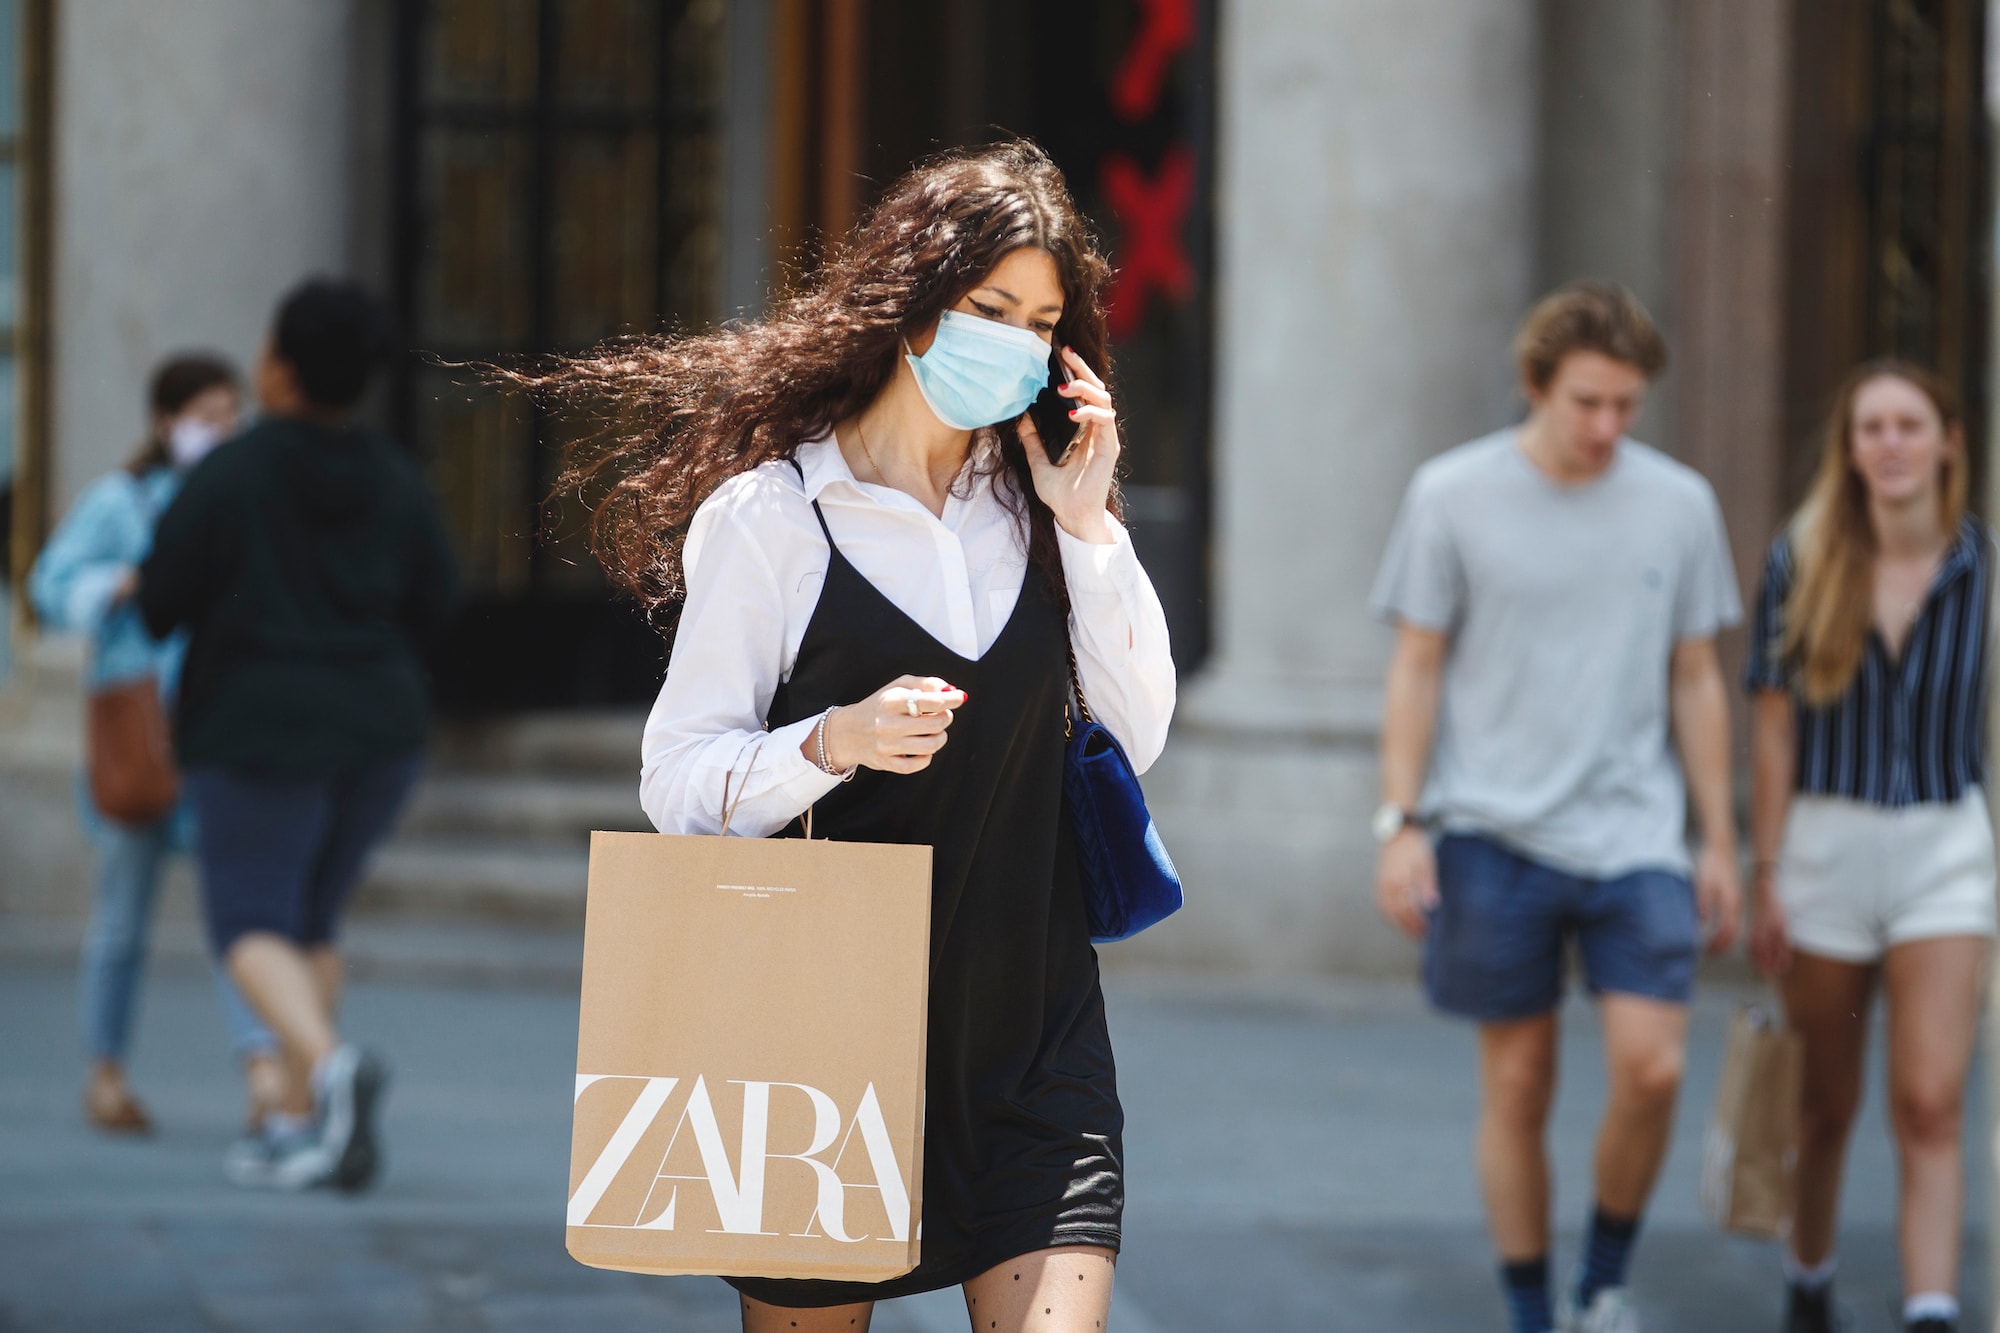 Zara Closes 1,200 Stores & Shifts to E-Commerce